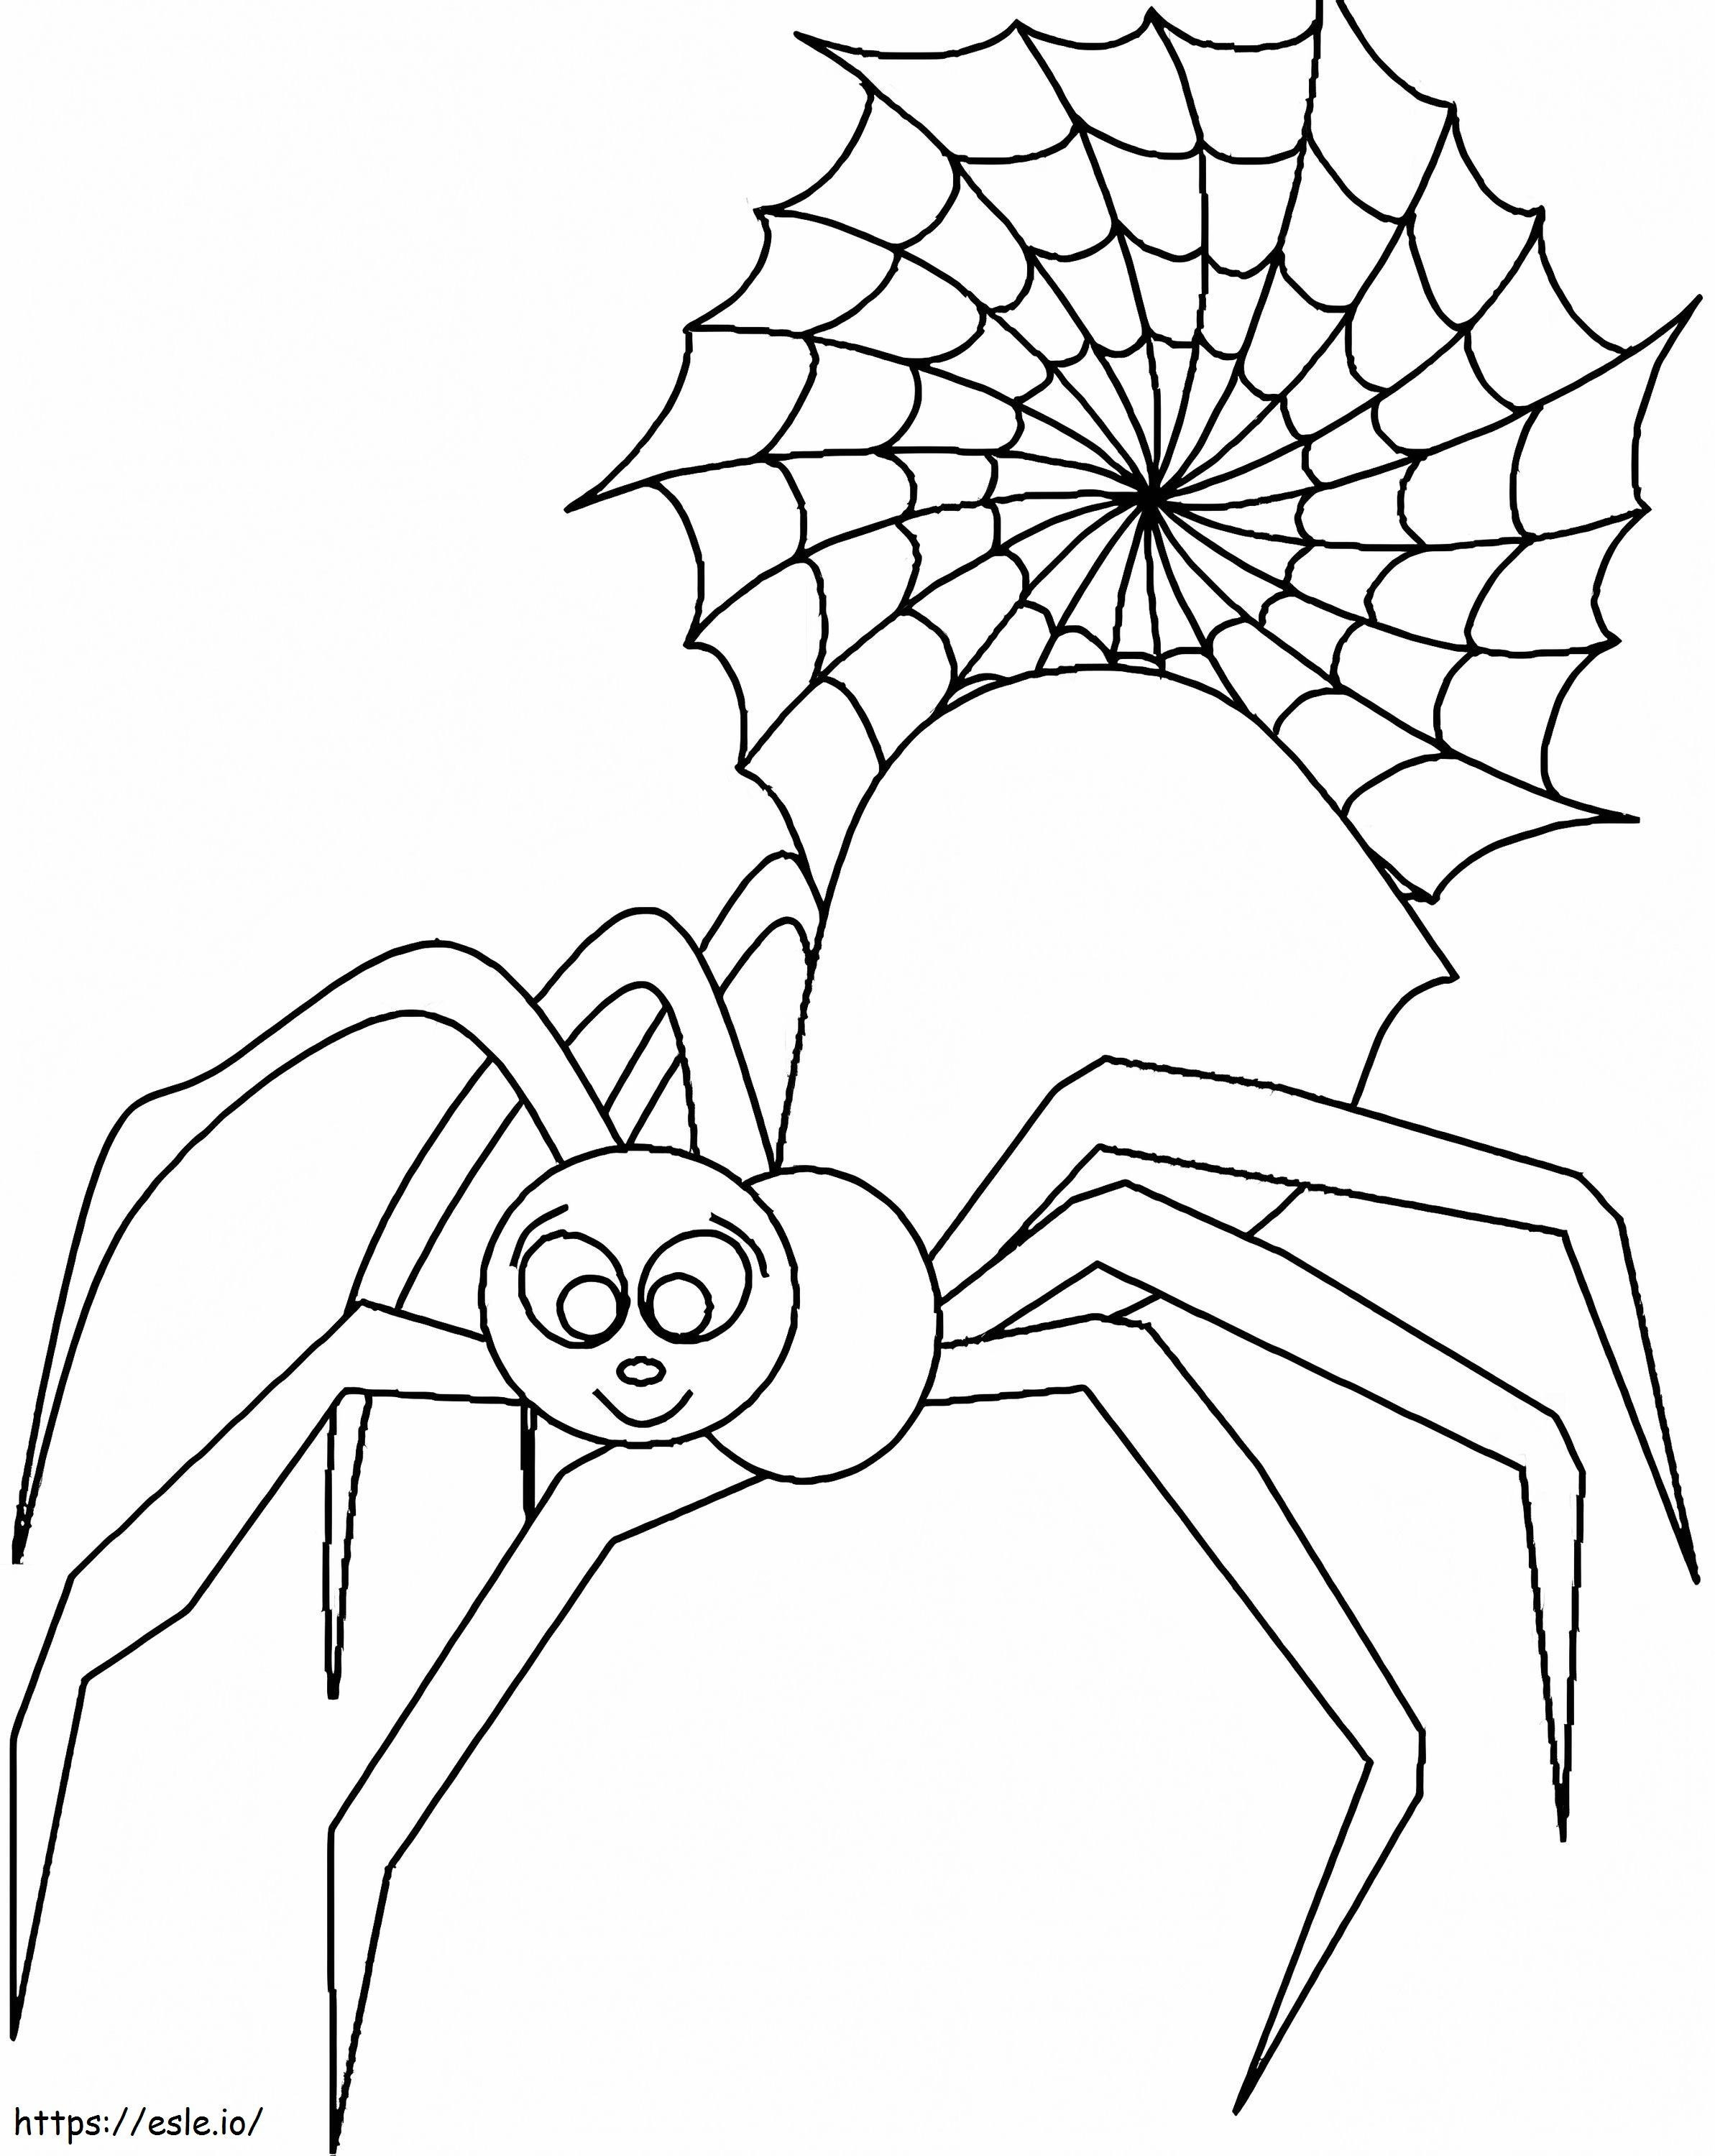 Big Spider Smiling coloring page